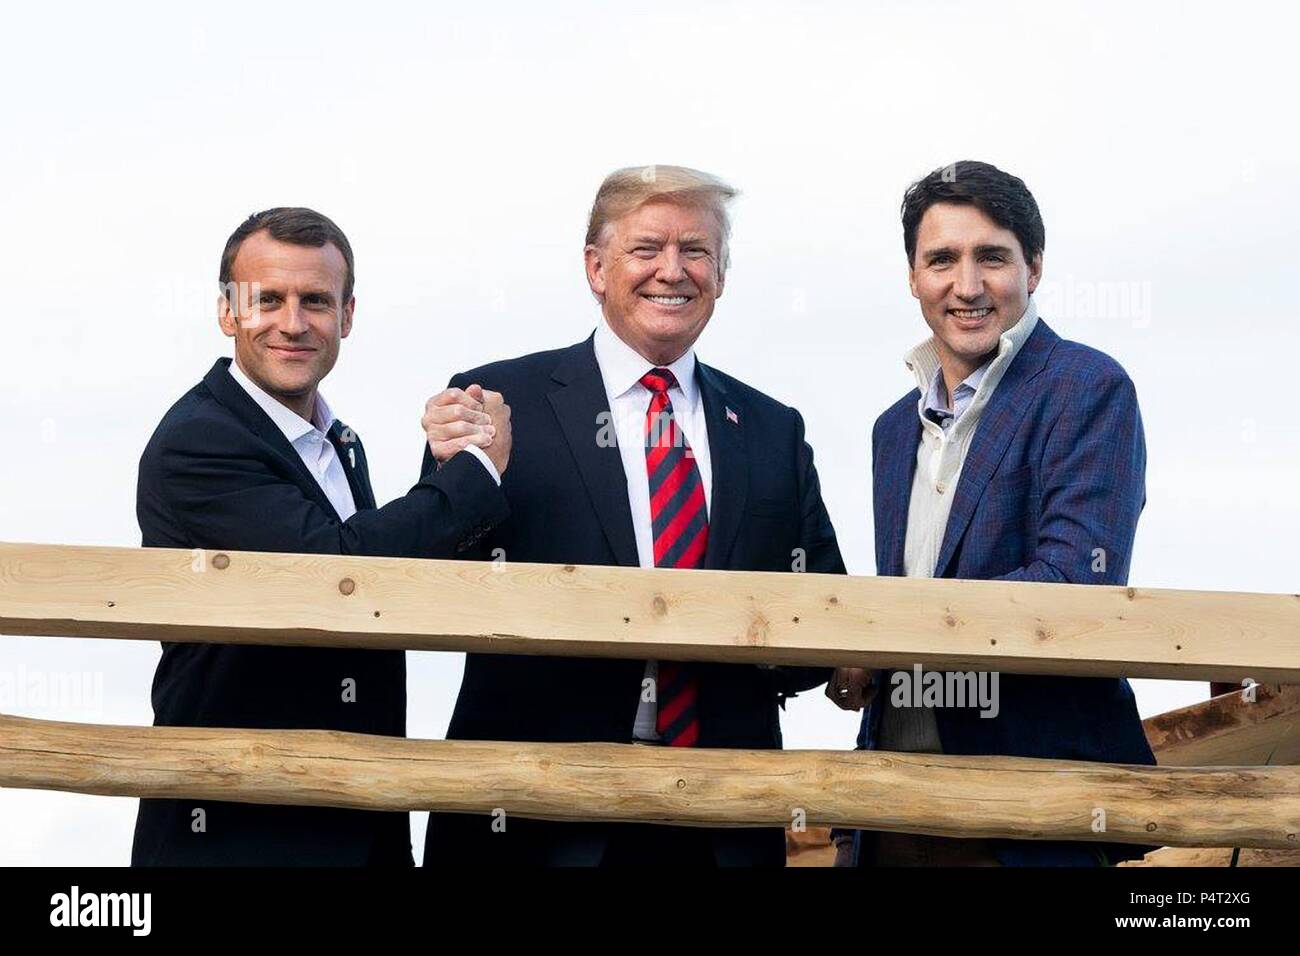 U.S. President Donald Trump, center, with Canadian Prime Minister Justin Trudeau, right, and French President Emmanuel Macron, at the working dinner during the G7 Summit at the Black Bear Chalet June 8, 2018 in La Malbaie, Quebec. Stock Photo